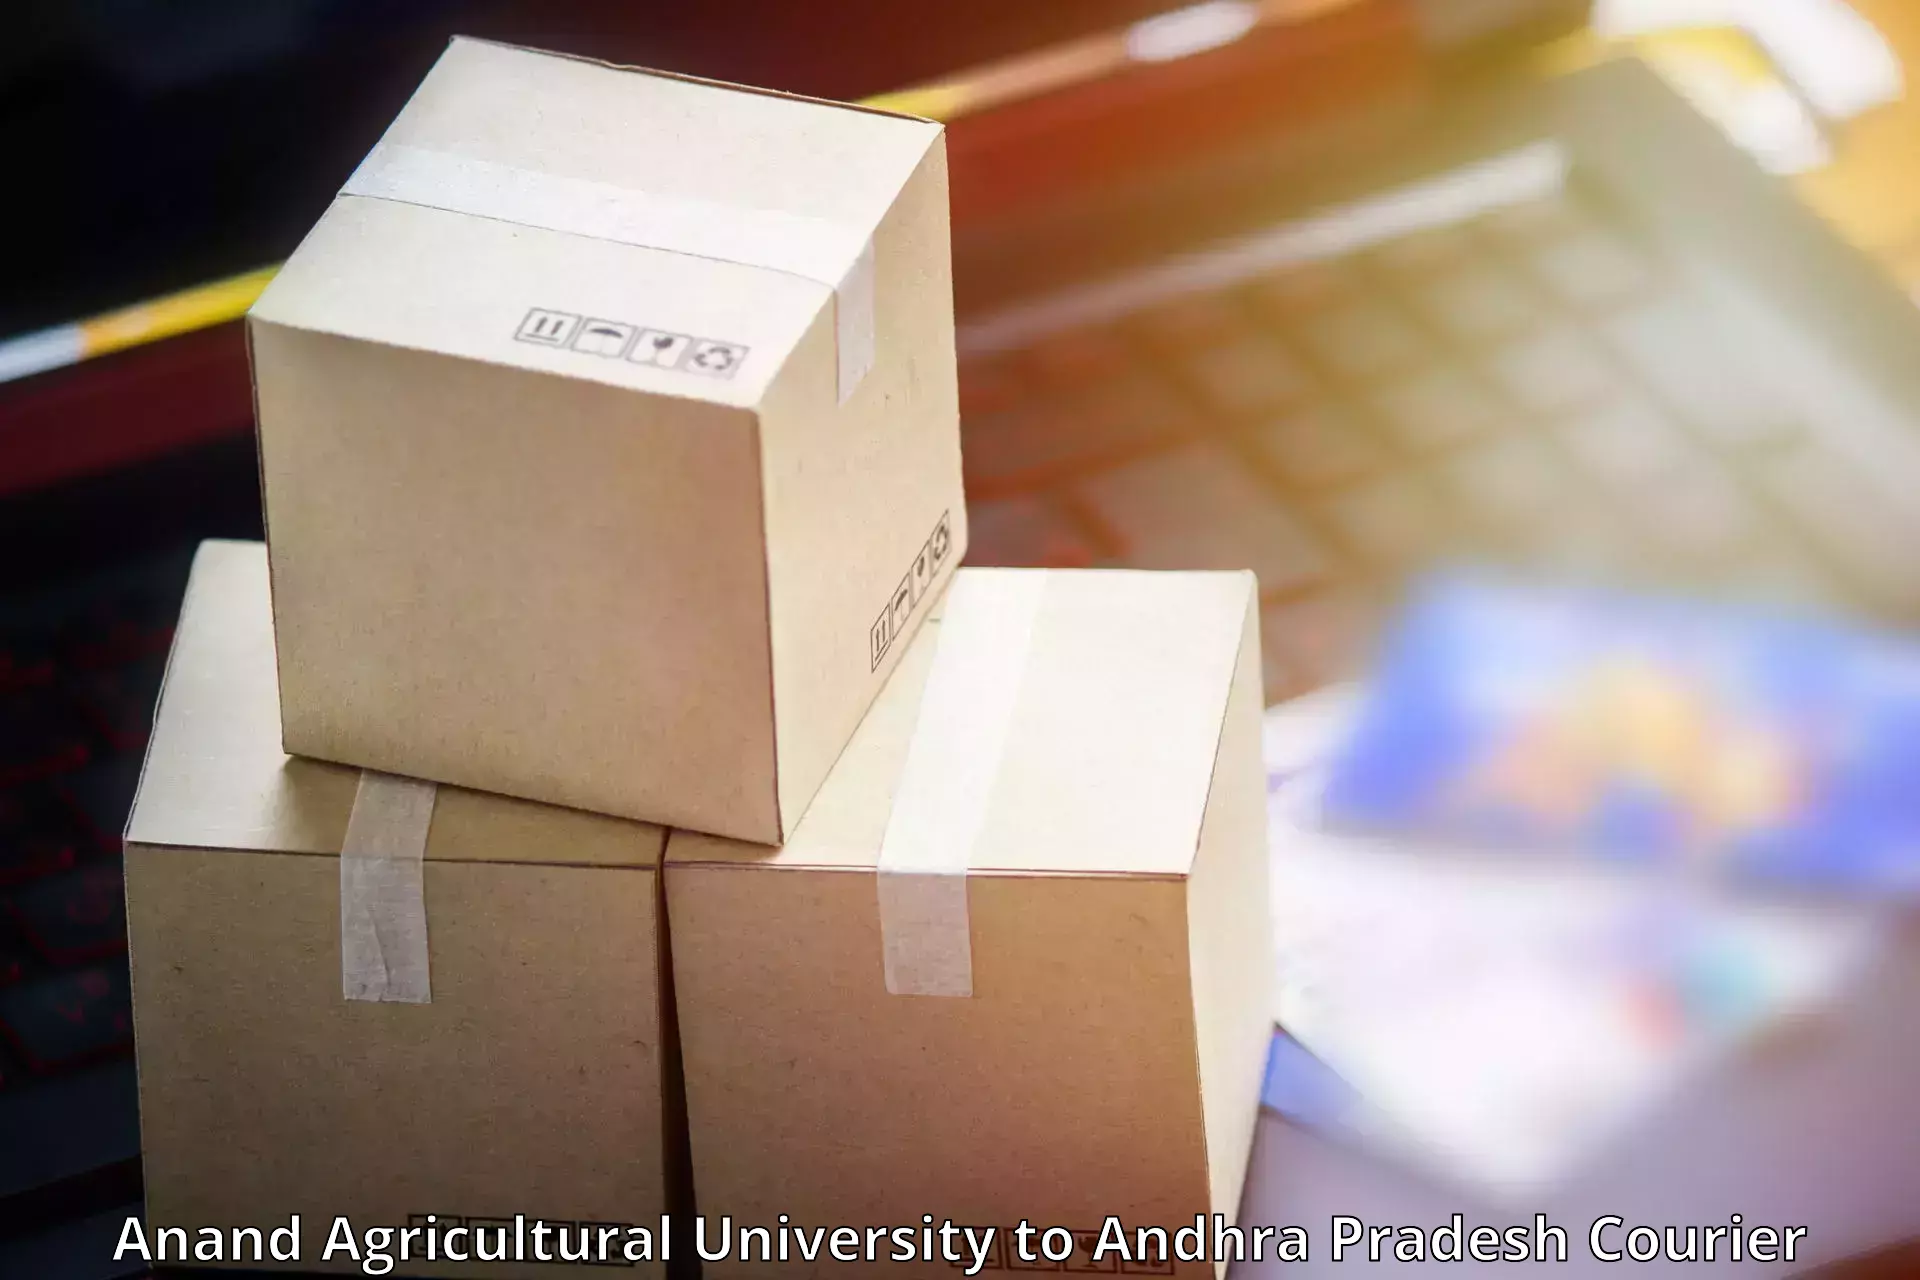 Courier service innovation Anand Agricultural University to Malikipuram